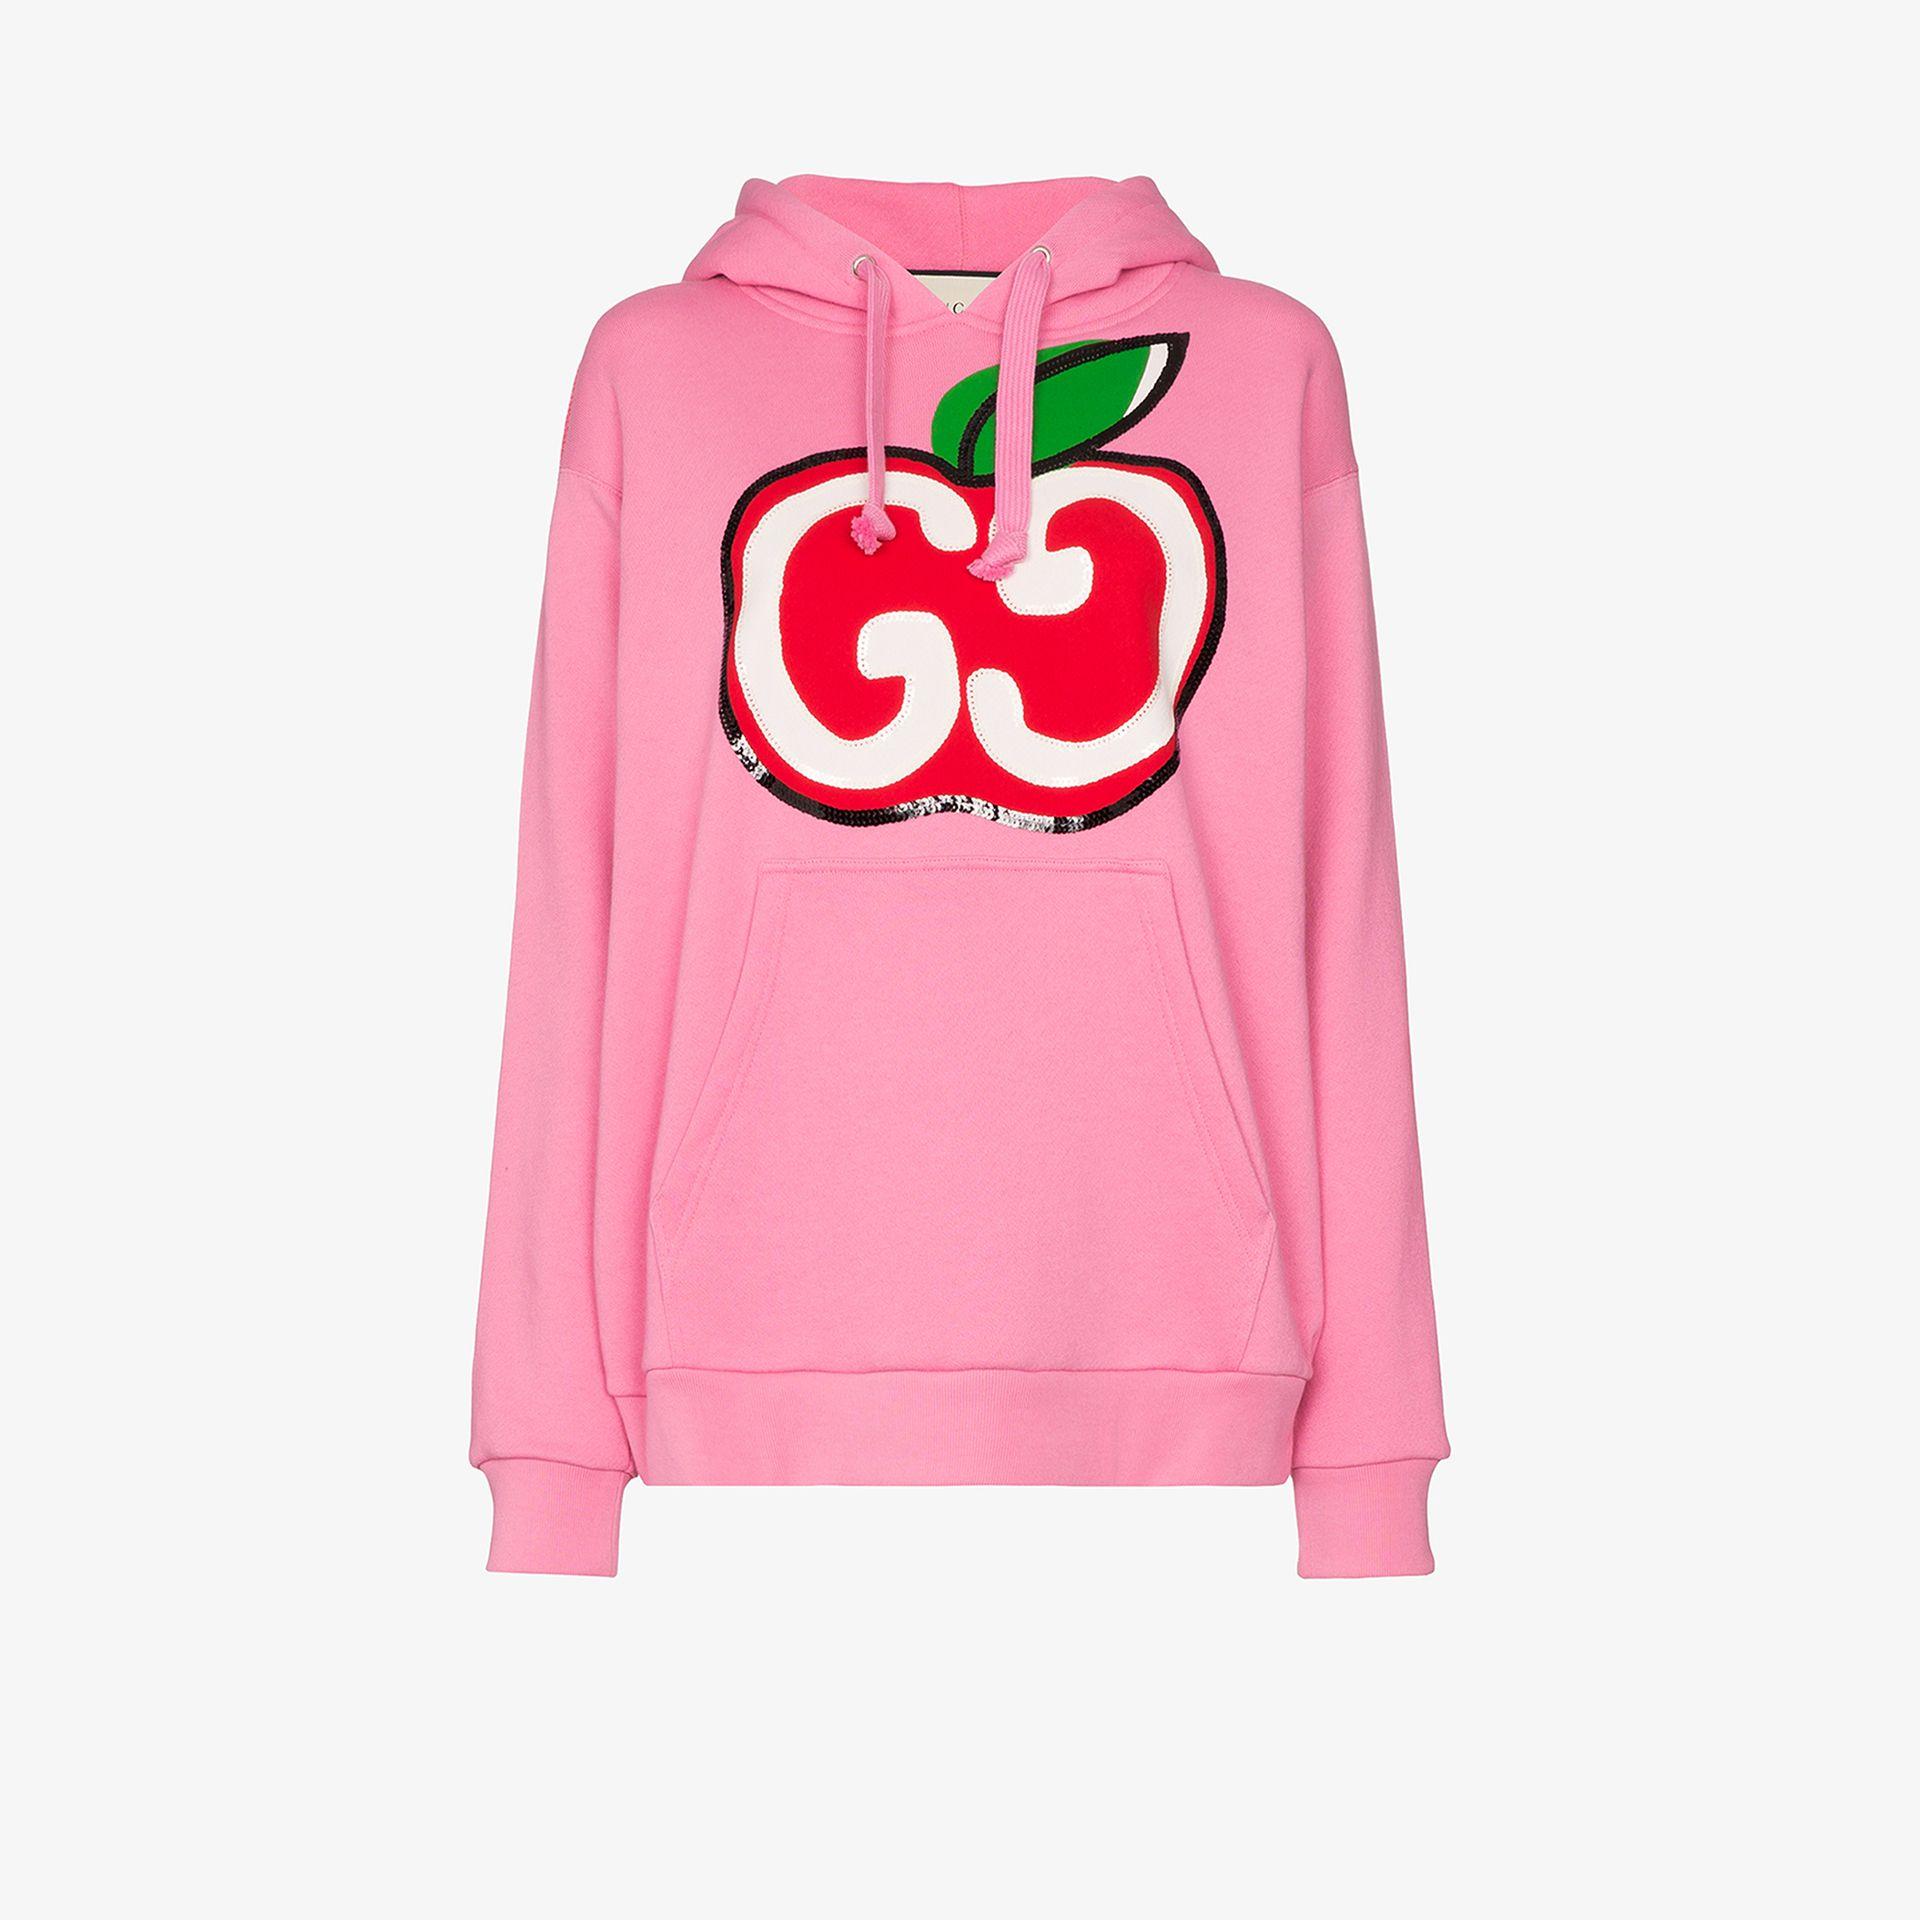 Gucci Cotton Hooded Sweatshirt With GG Apple Print in Pink | Lyst